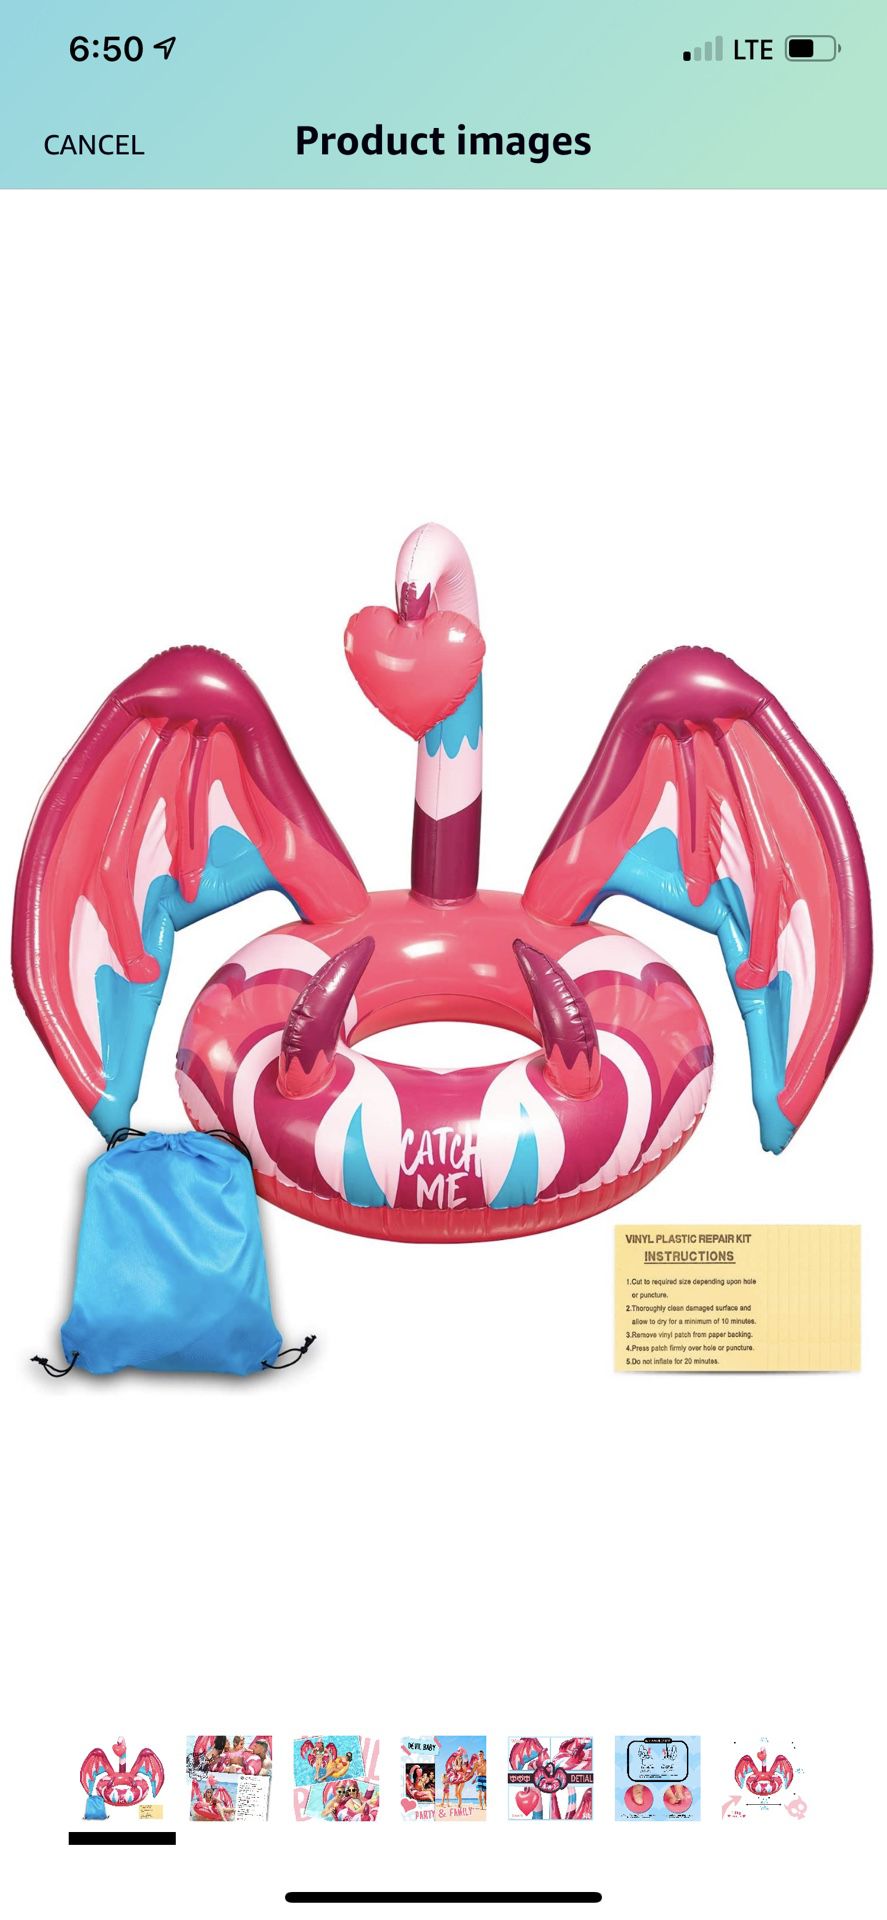 Inflatable Pool Float Swimming Pool Party Decorations Summer Lounge Raft with Unreal Unique Wings Decorations Quick-Fill Valves Summer Beach Toy for K